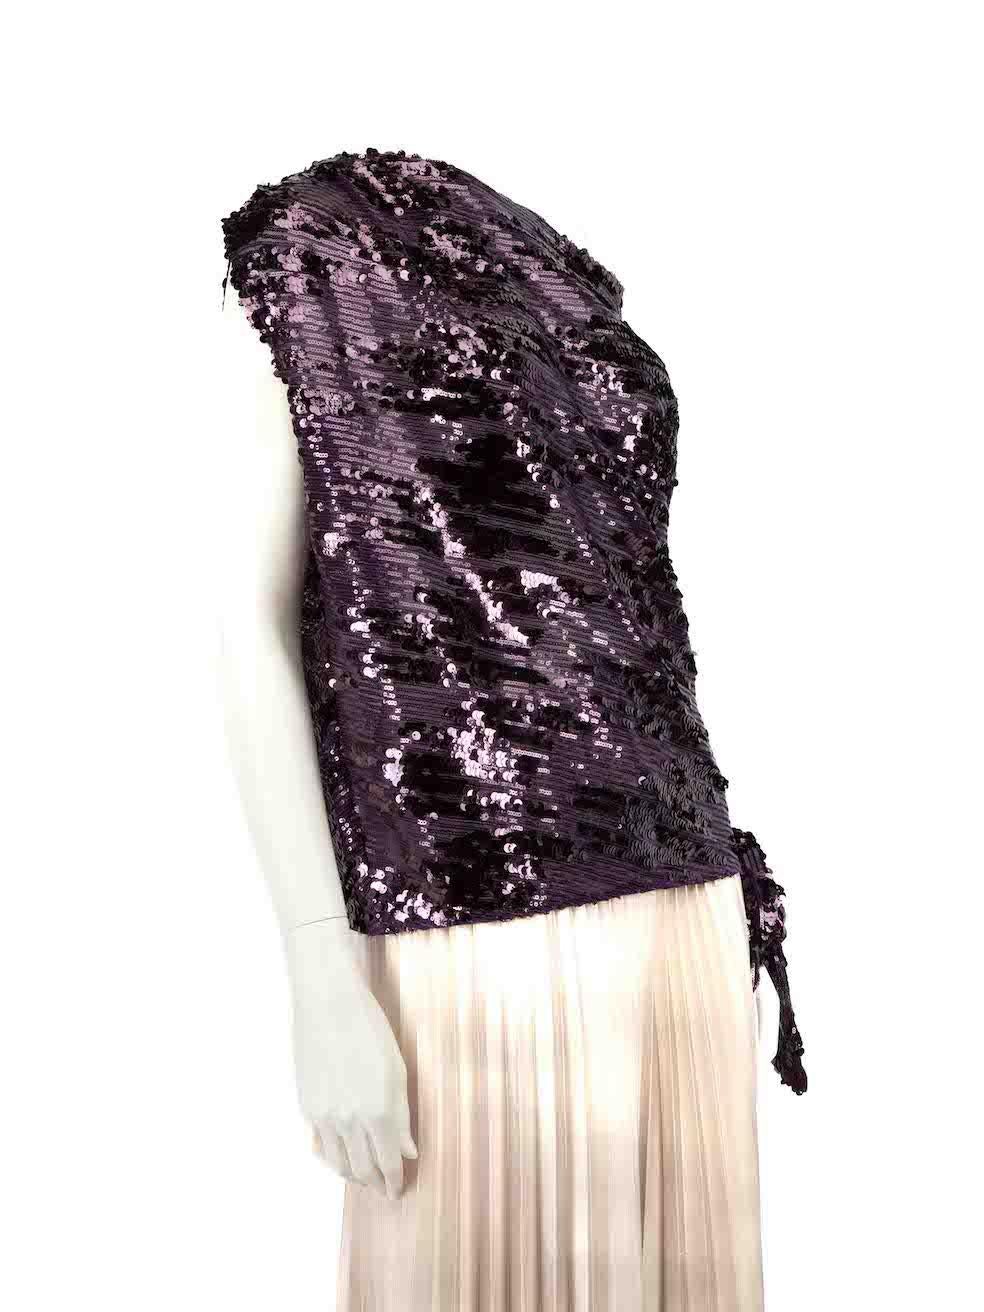 CONDITION is Very good. Hardly any visible wear to top is evident on this used Hondaya designer resale item.
 
 
 
 Details
 
 
 Purple
 
 Synthetic
 
 Top
 
 Sequinned
 
 Asymmetric sleeves
 
 Round neck
 
 
 
 
 
 Made in Lebanon
 
 
 
